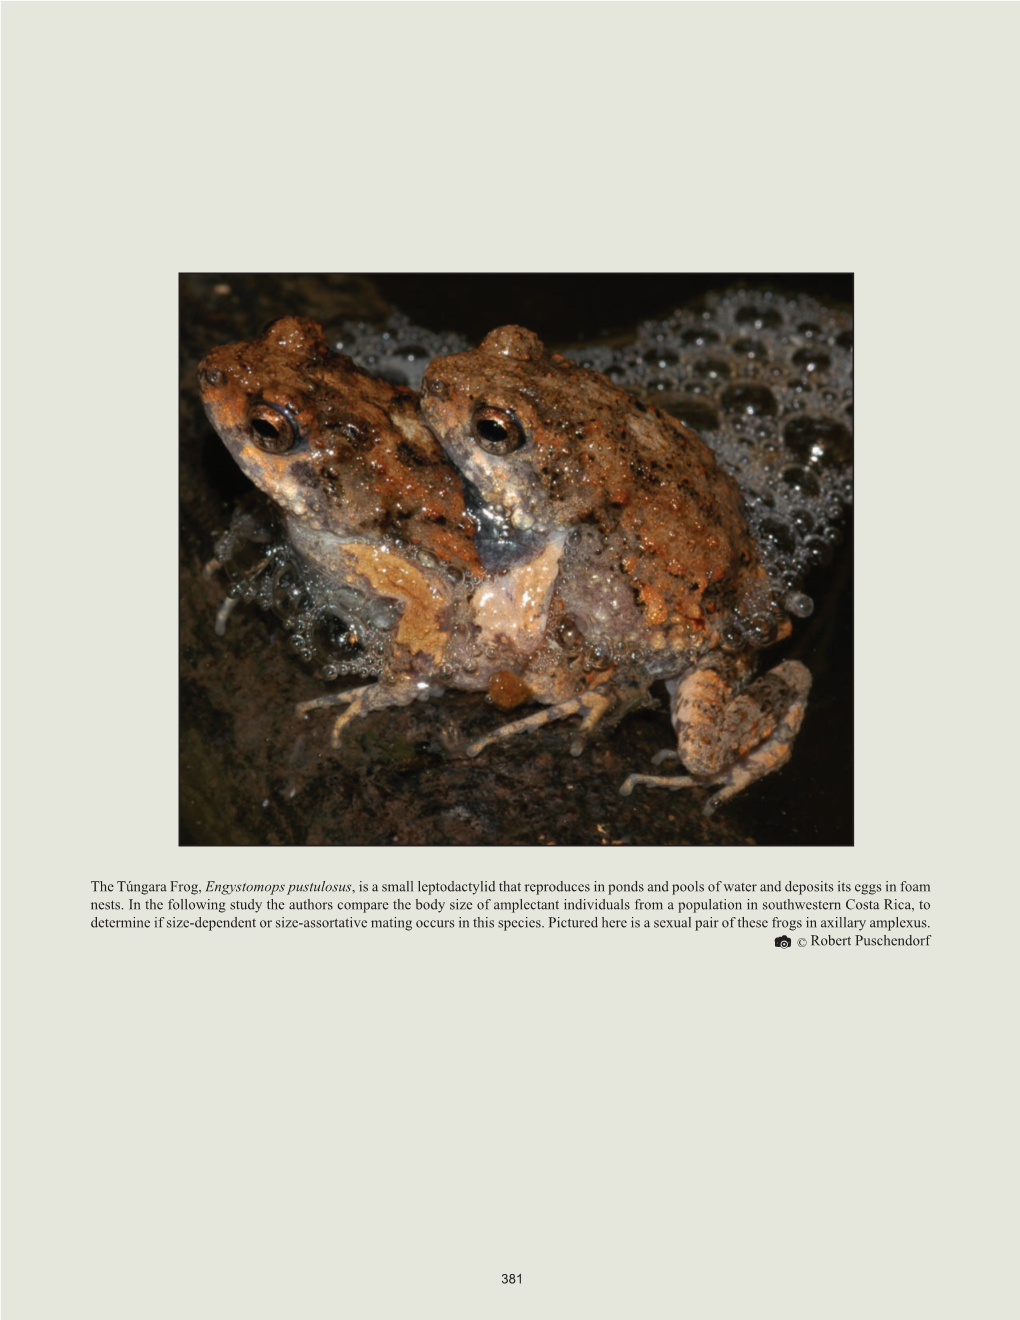 The Túngara Frog, Engystomops Pustulosus, Is a Small Leptodactylid That Reproduces in Ponds and Pools of Water and Deposits Its Eggs in Foam Nests